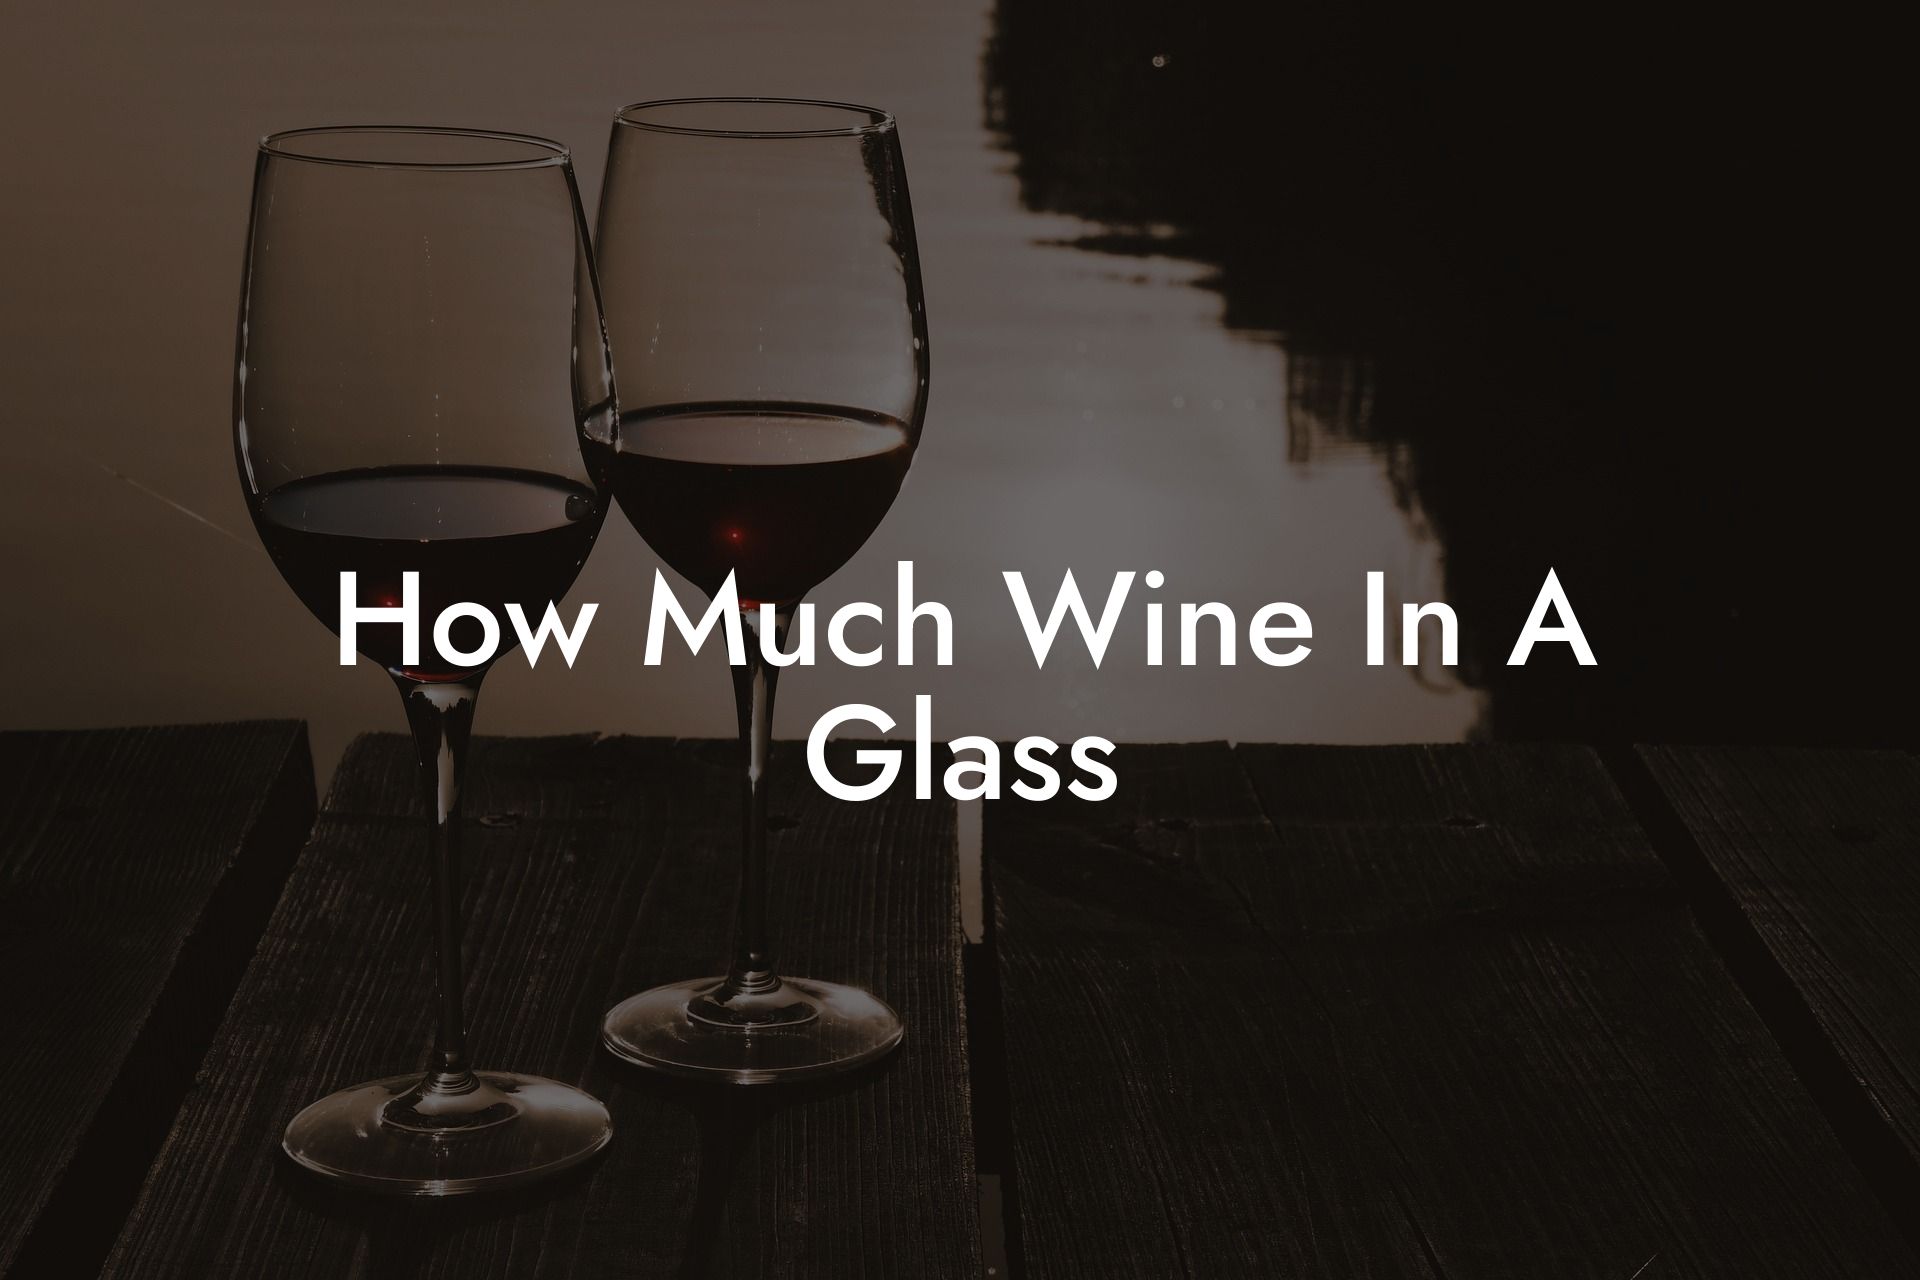 How Much Wine In A Glass